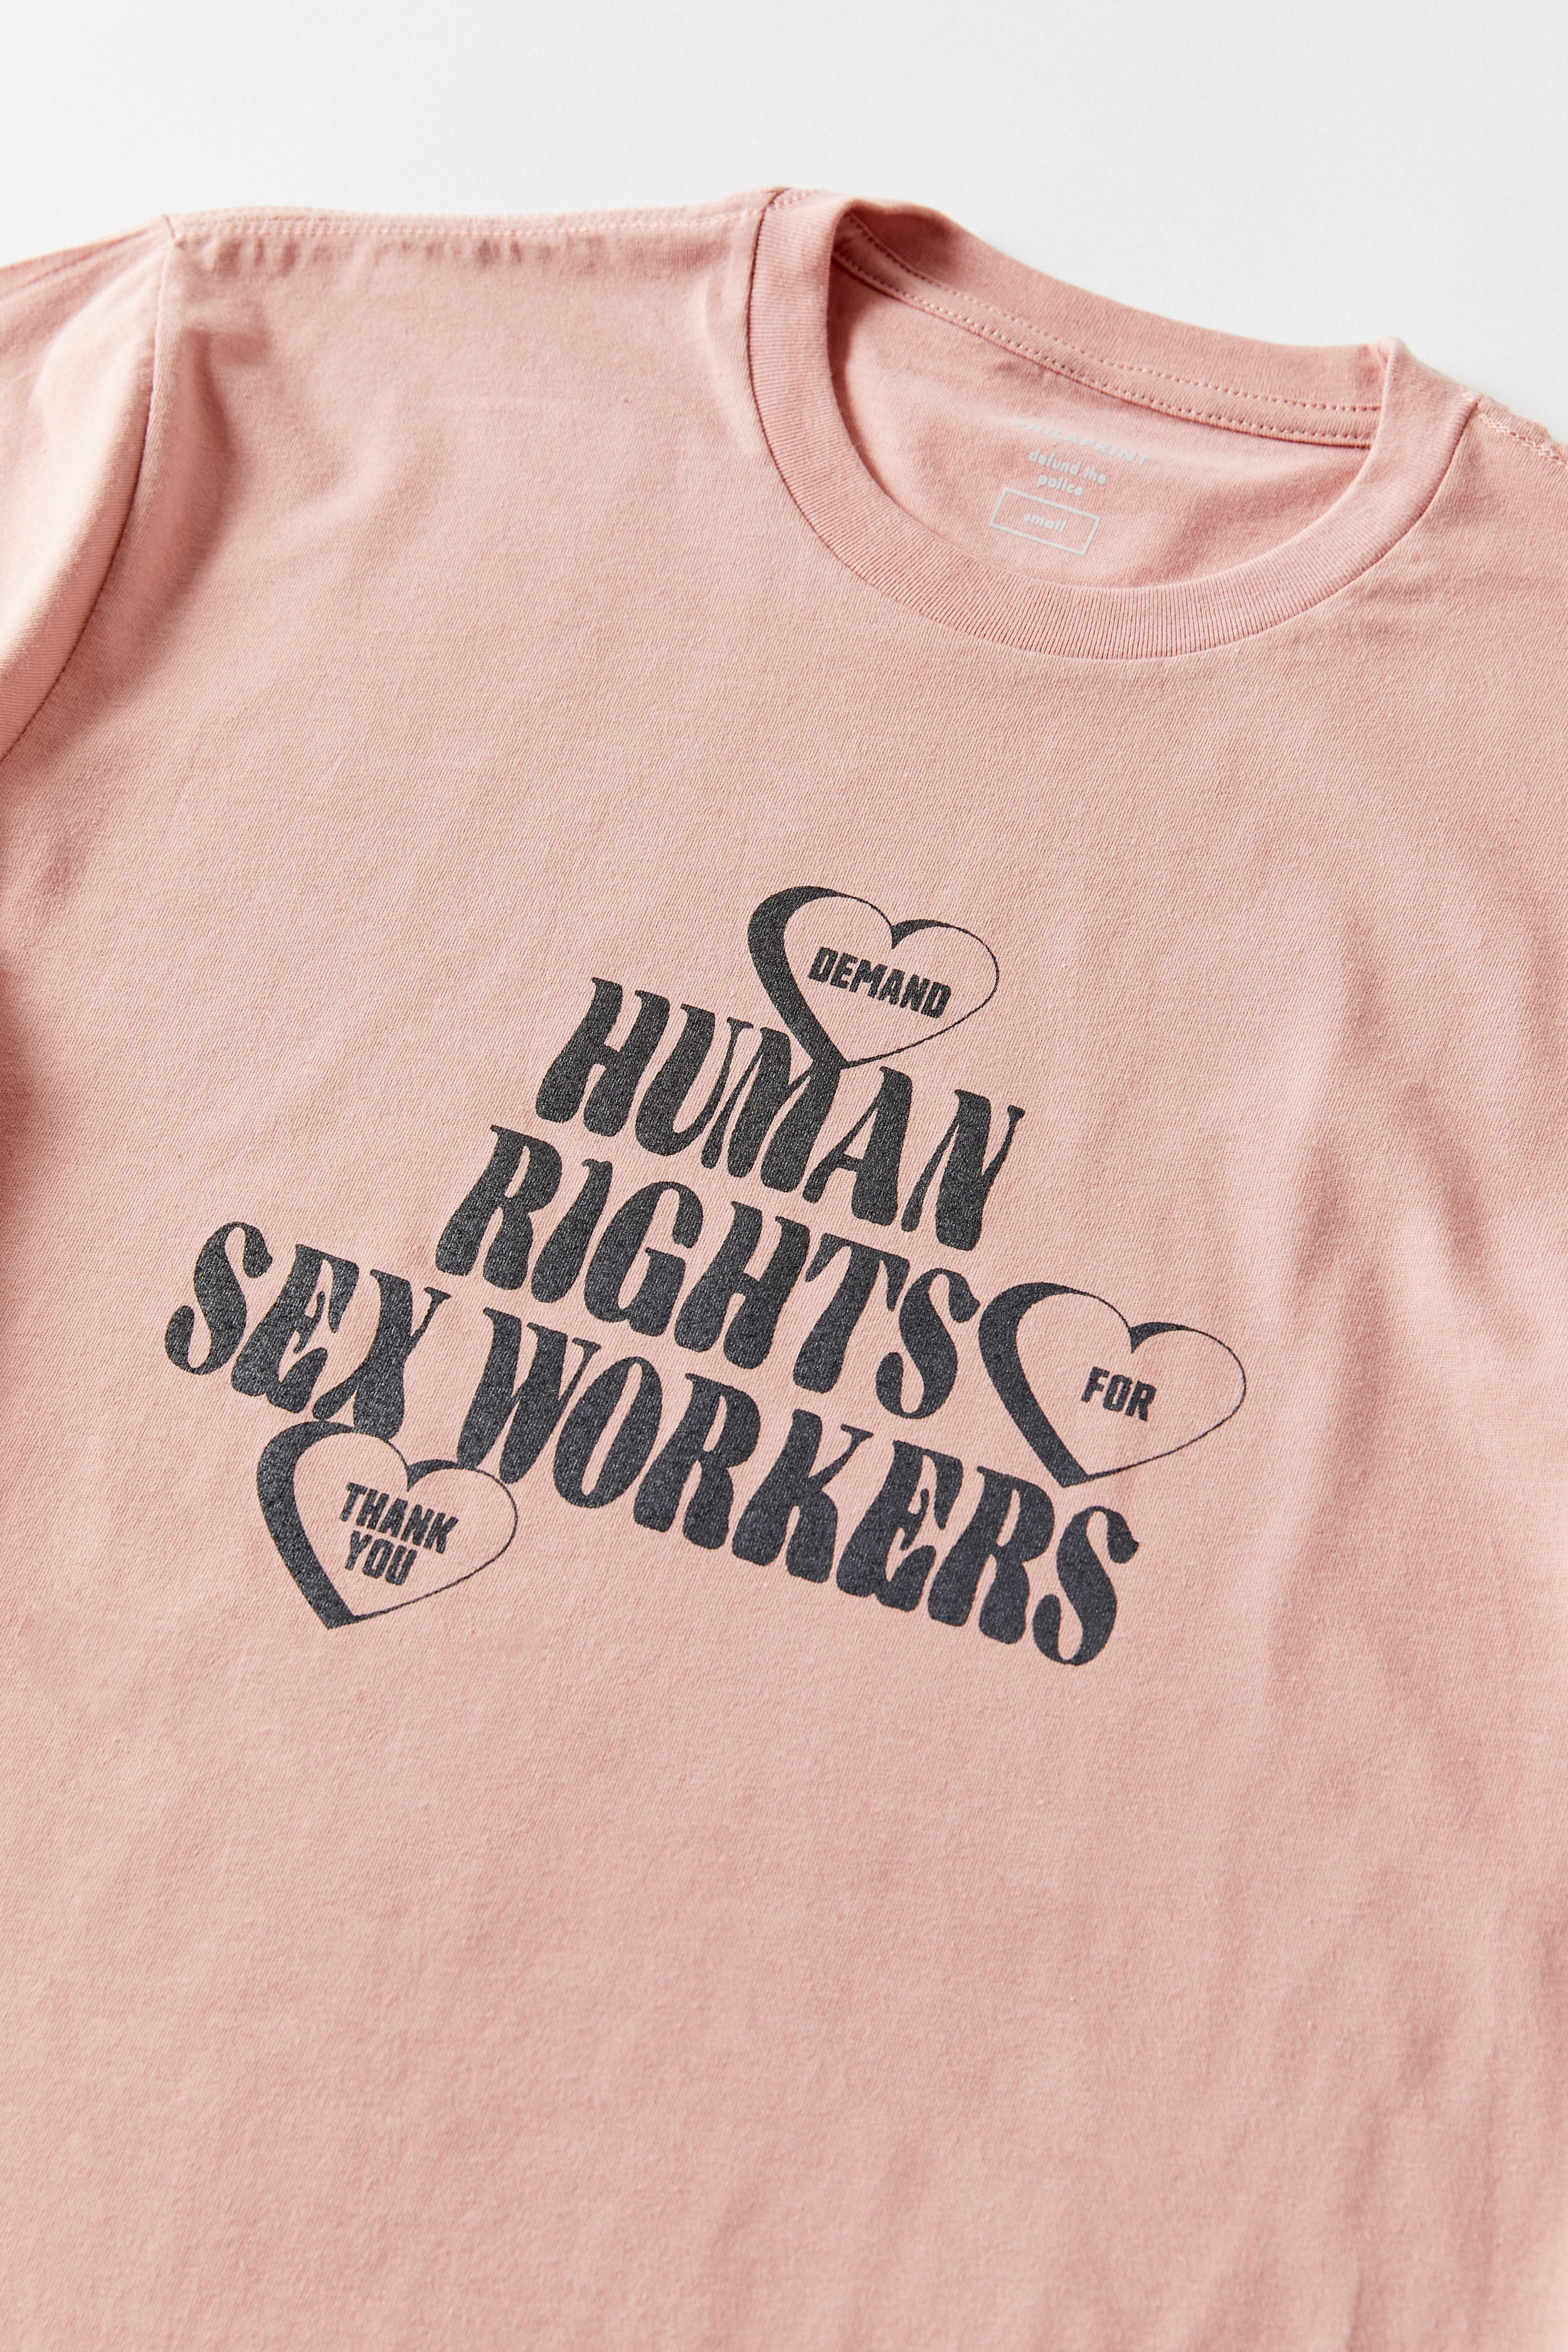 Sex Workers Rights T-Shirt close up